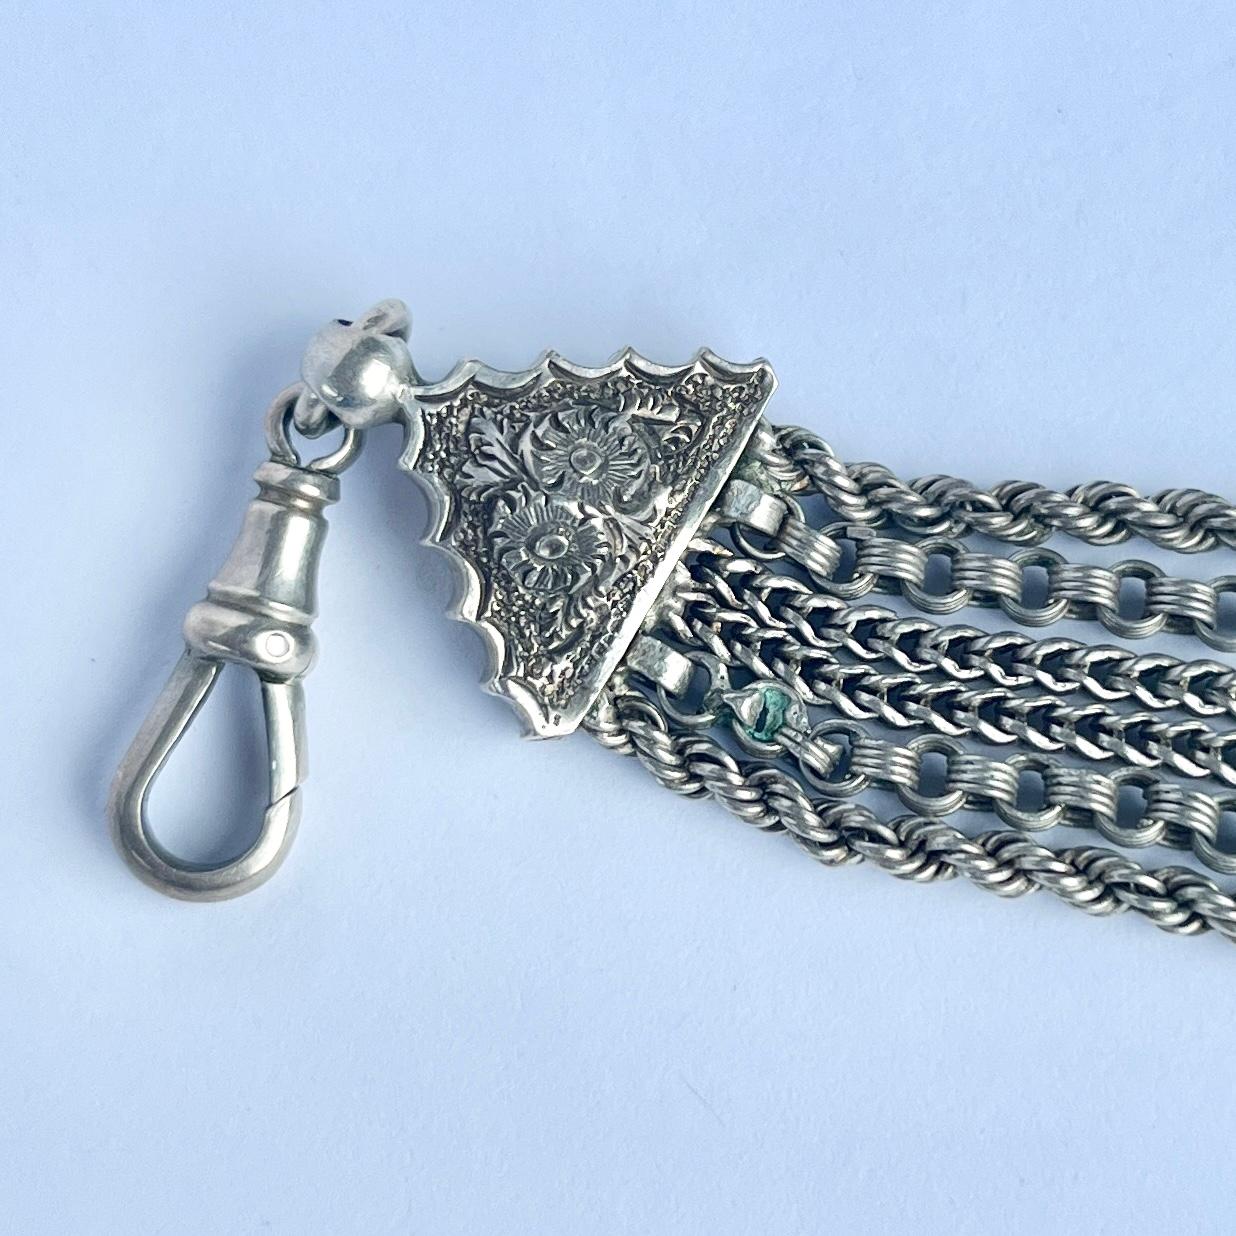 An Albert chain is an essential in any gents wardrobe. This particular Albert  is made up of different style chains. There is a dog clip at one end and a bolt ring clasp.  

Length: 24.5cm

Weight: 34.5g